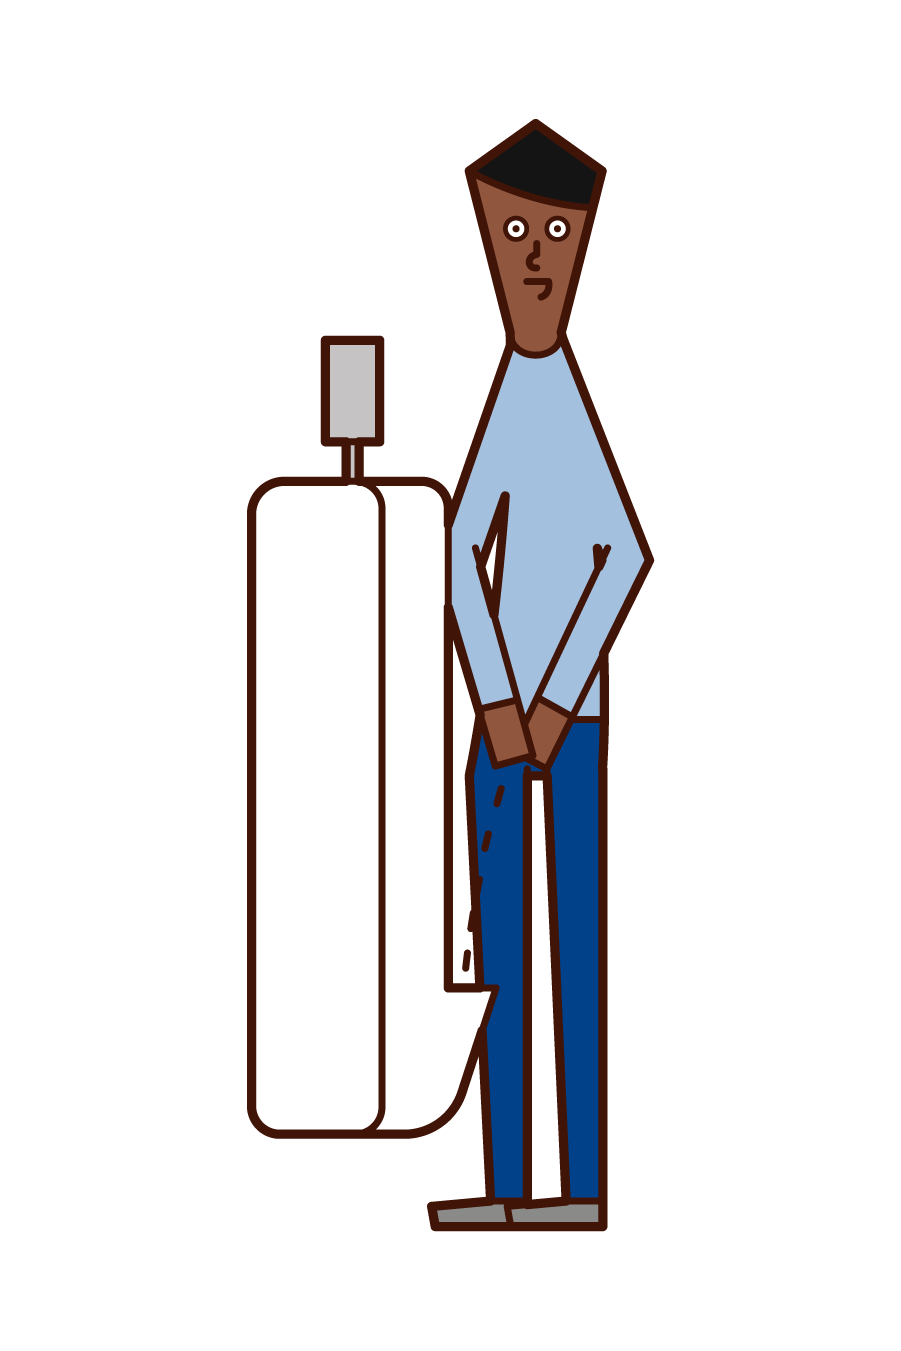 Illustration of a man who uses a toilet